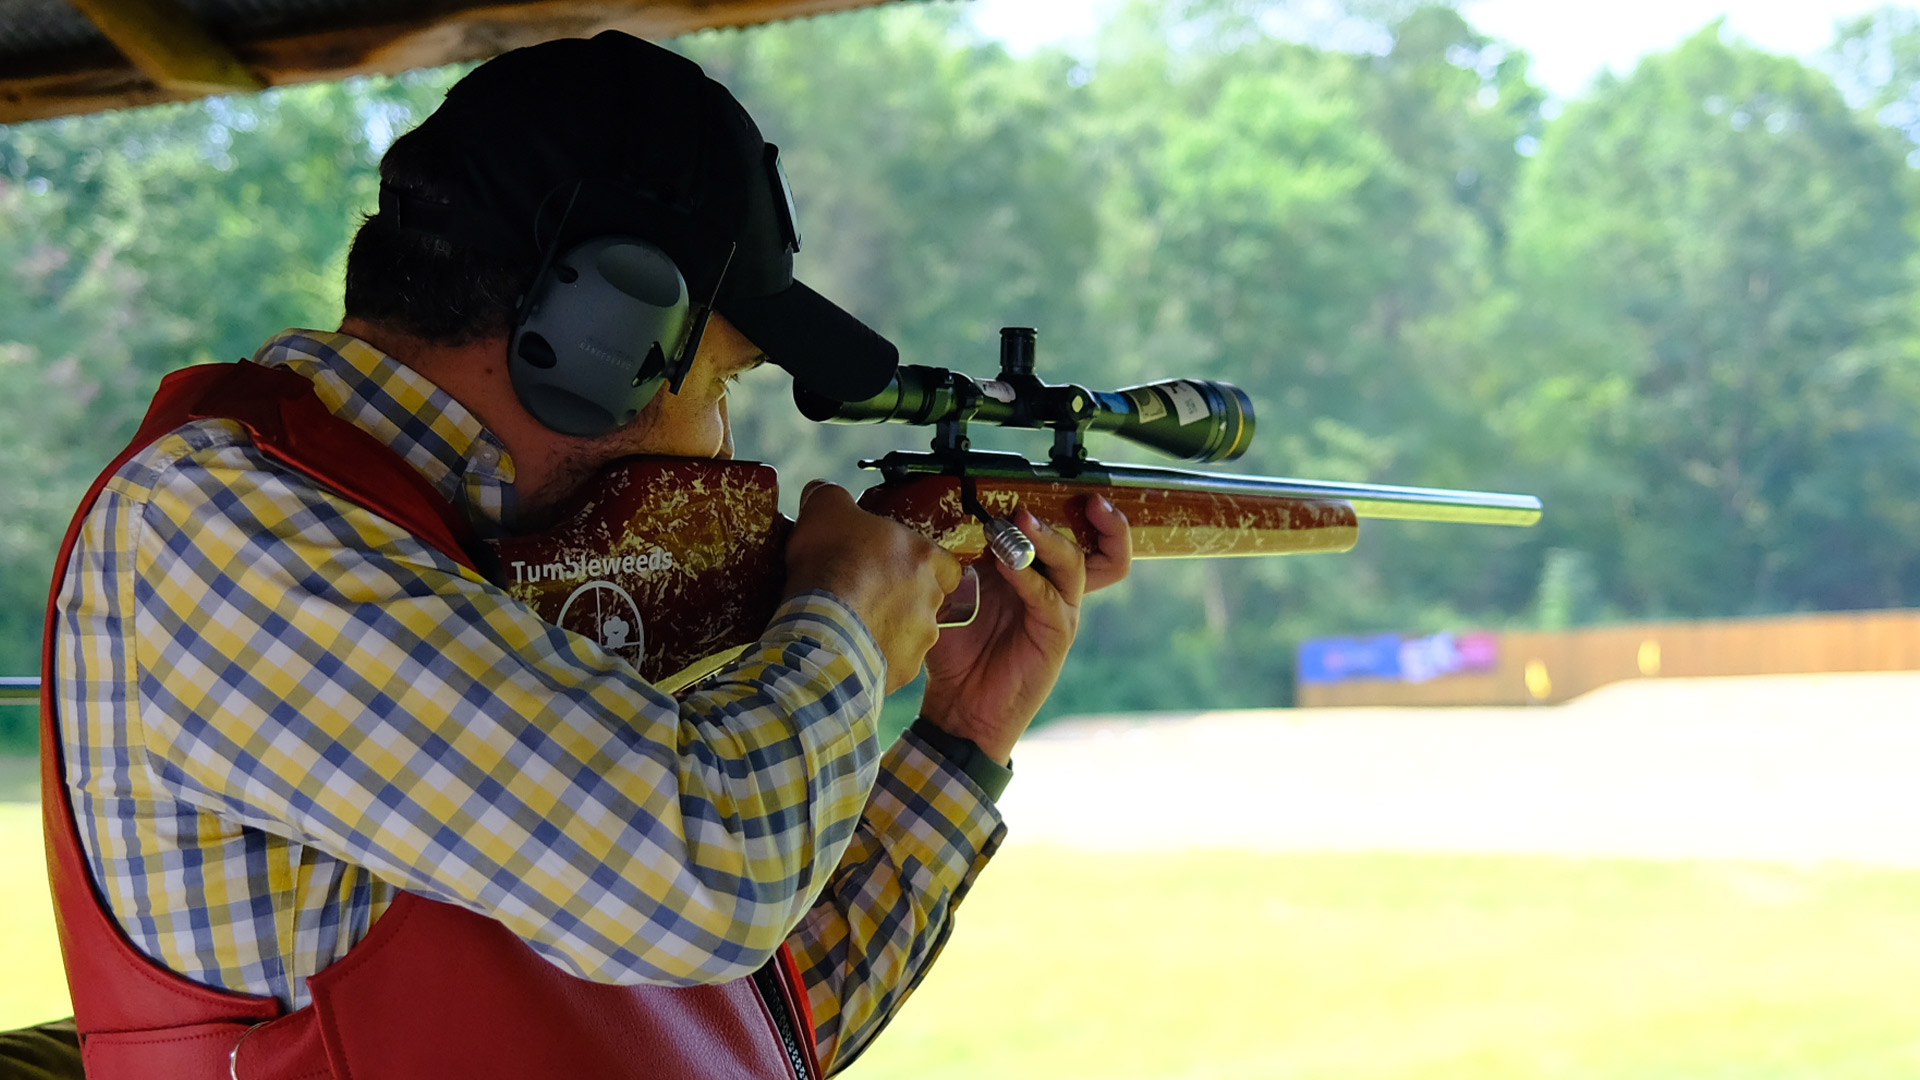 Jose Gonzalez competing in silhouette rifle